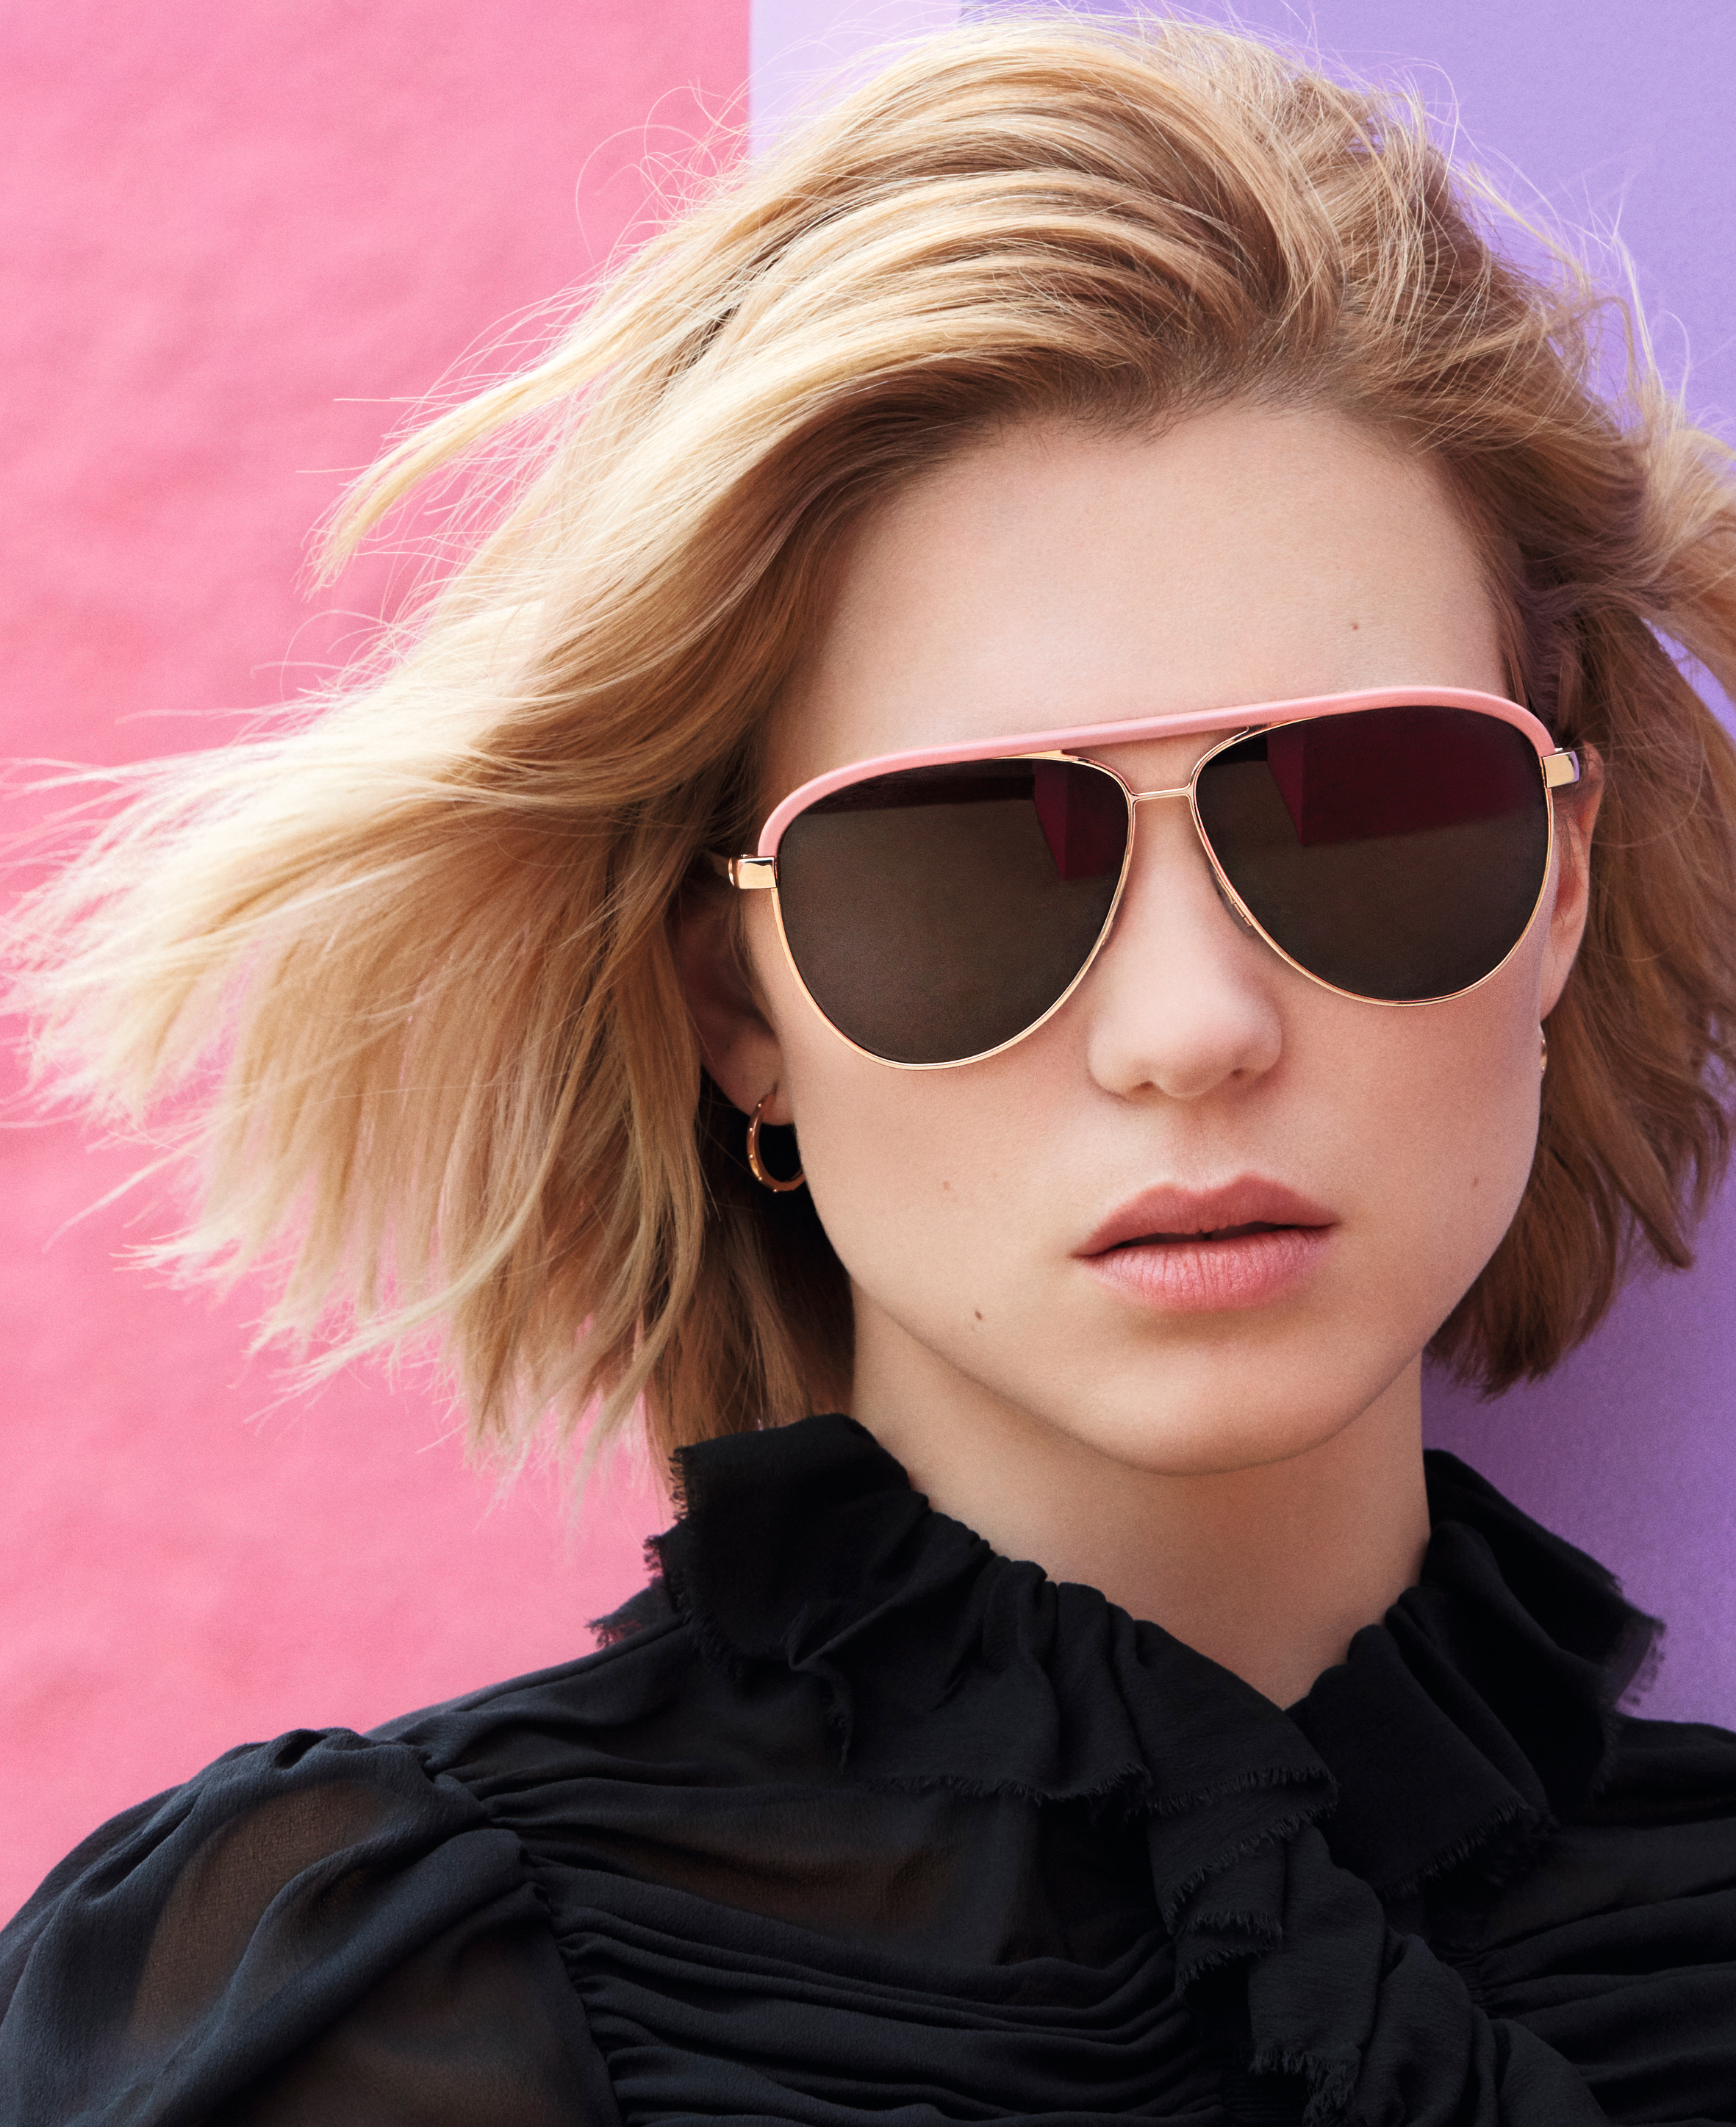 Lea Seydoux Women Actress Blonde Open Mouth Earring Looking At Viewer Women With Shades Black Blouse 2362x2894